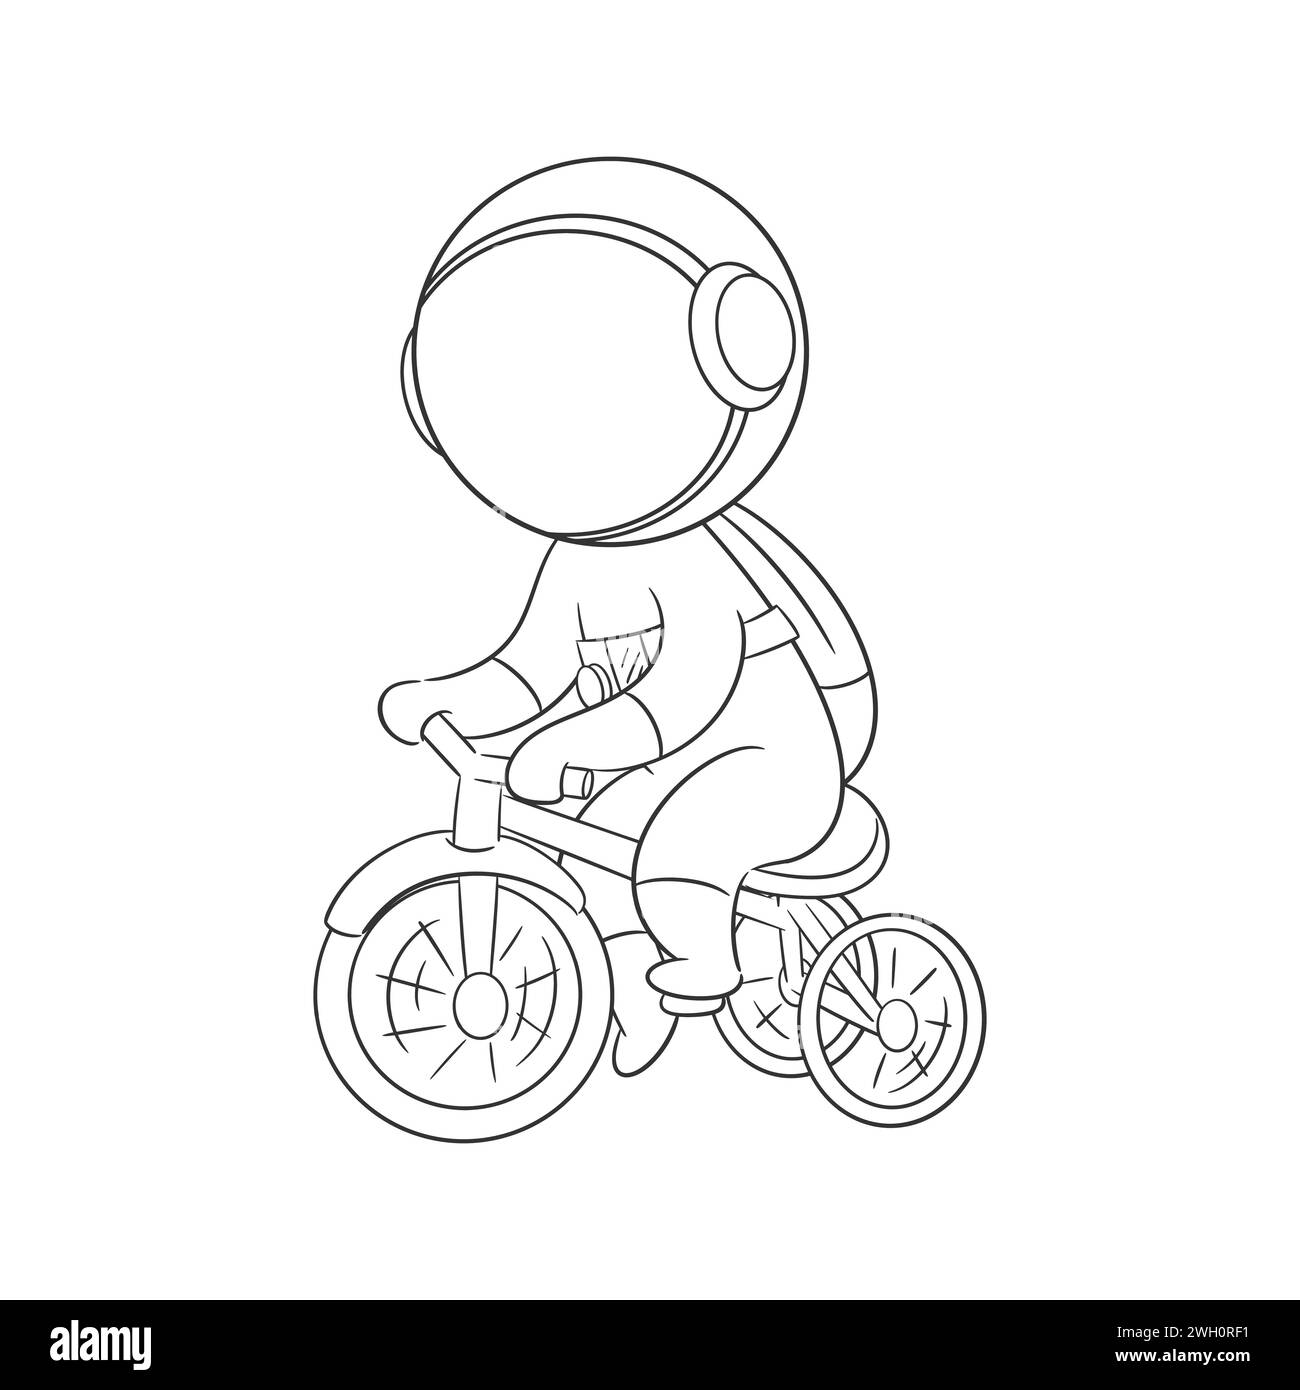 Astronaut riding a bicycle for coloring Stock Vector